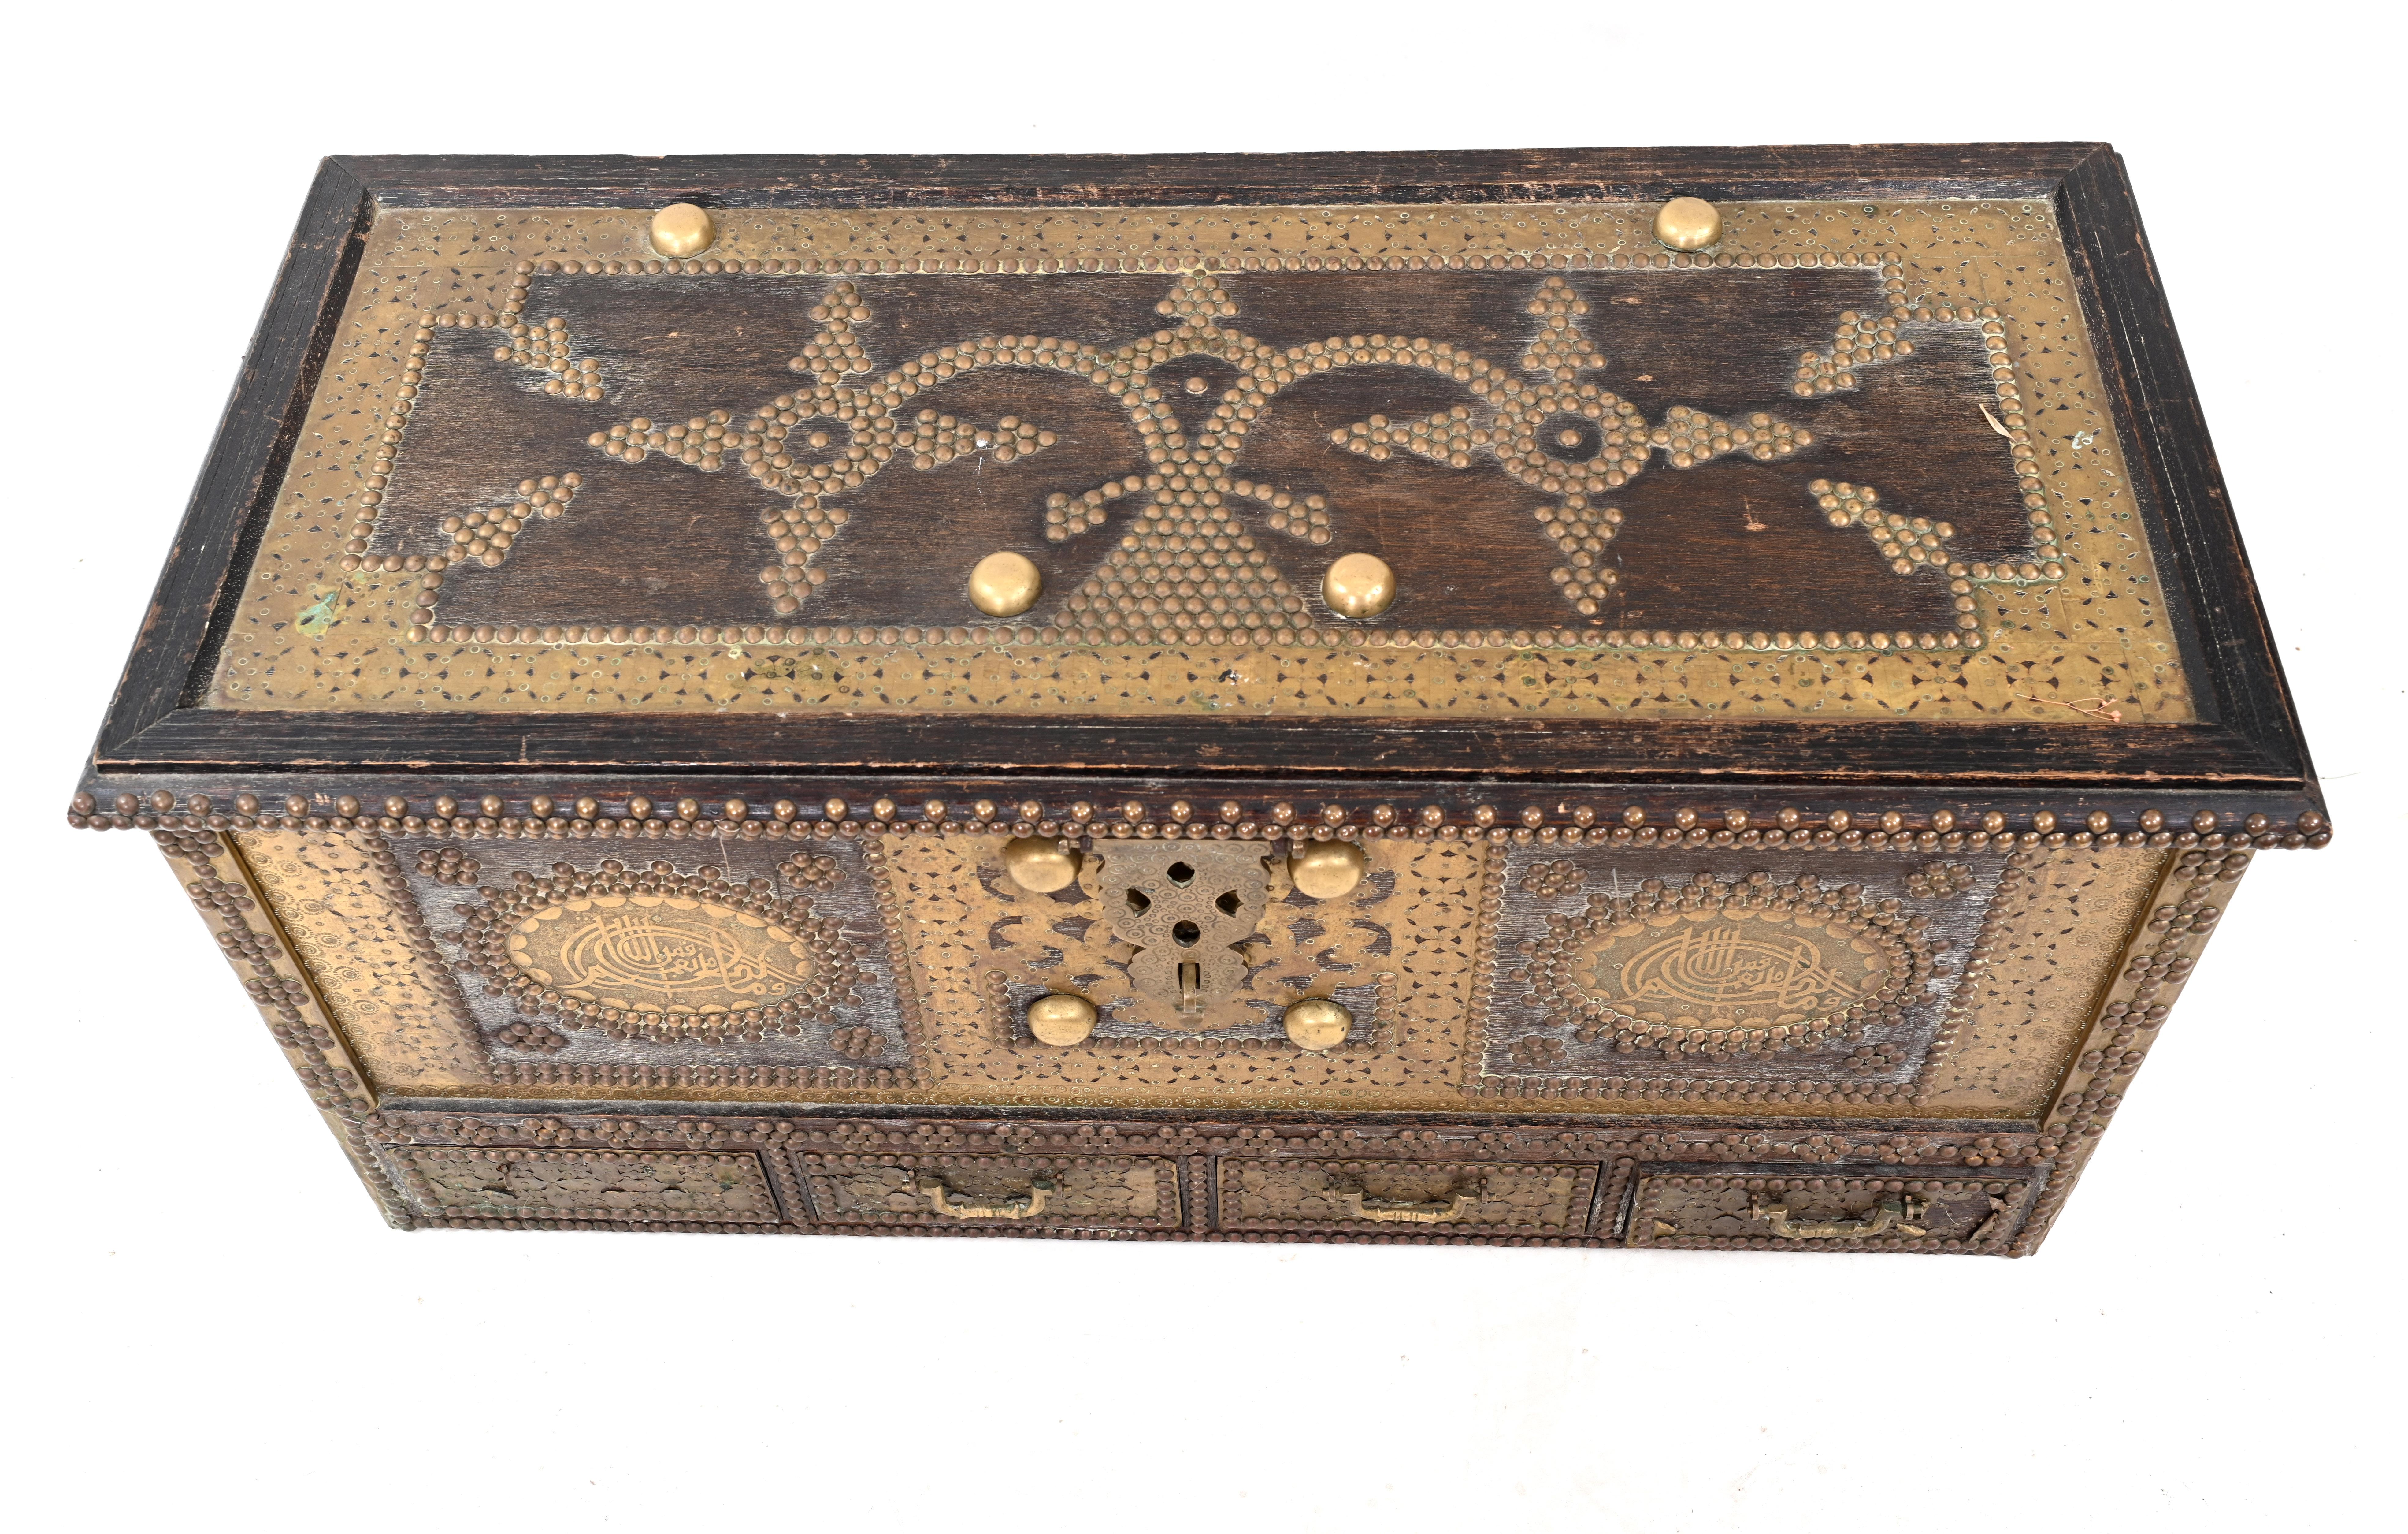 
Unique Islamic dowry chest 
Profusely decorated with brassware and other metal. 
Depicting prayers/blessings on the front. 
We date this important and collectable piece to circa 1820
Very bohemian chic interiors
Some of our items are in